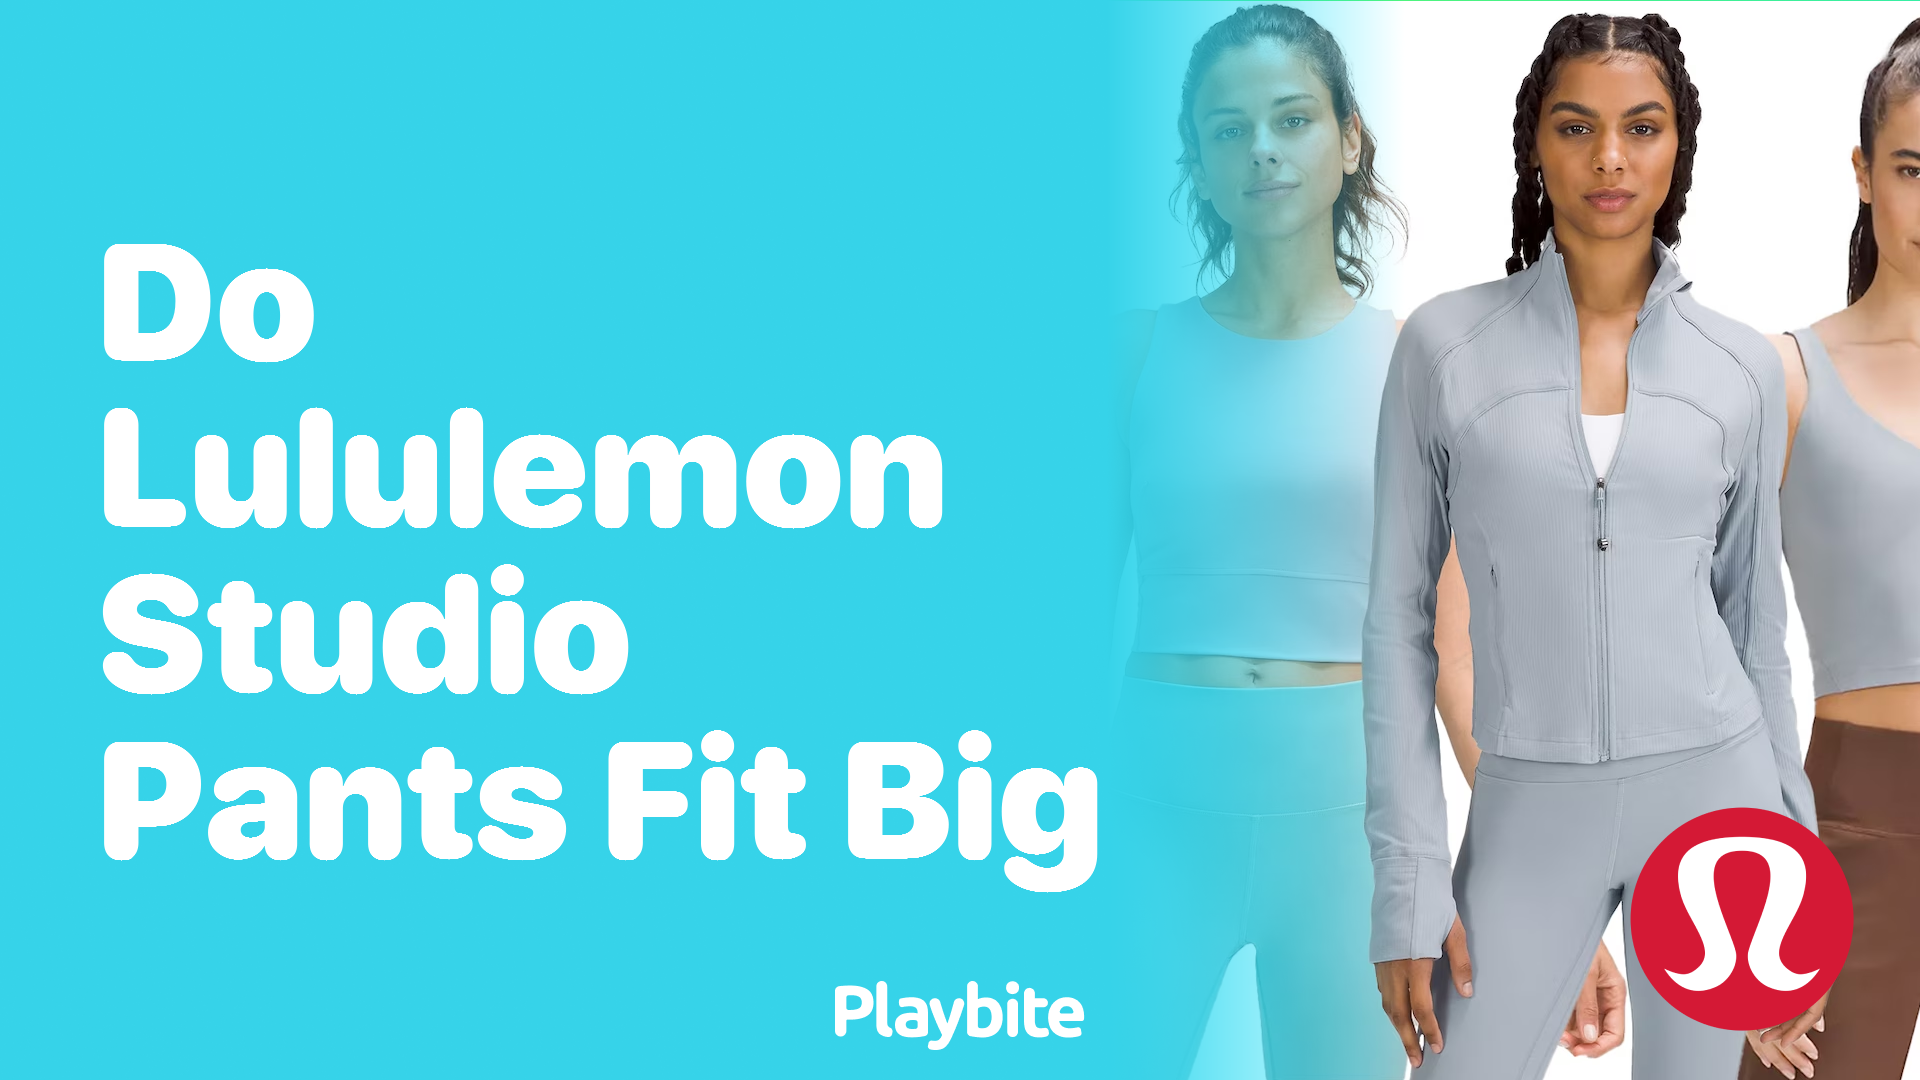 Do Lululemon Studio Pants Fit Big? Find Out Here! - Playbite